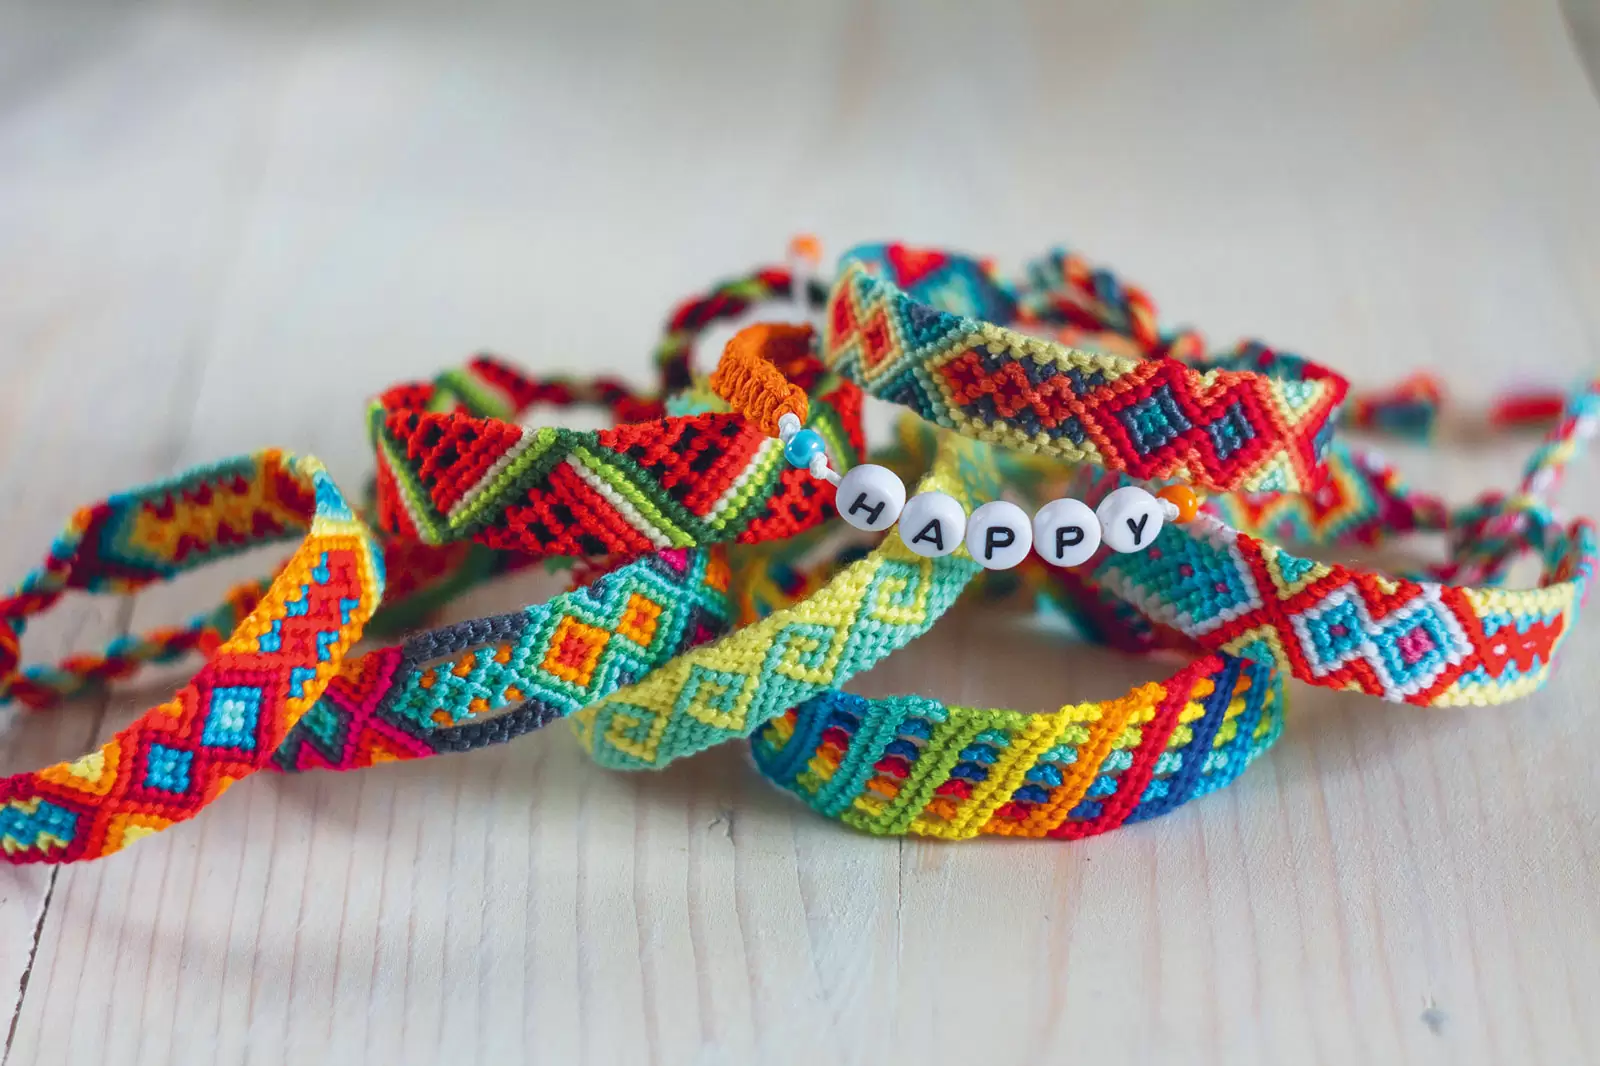 How to make a friendship bracelet in 5 easy steps